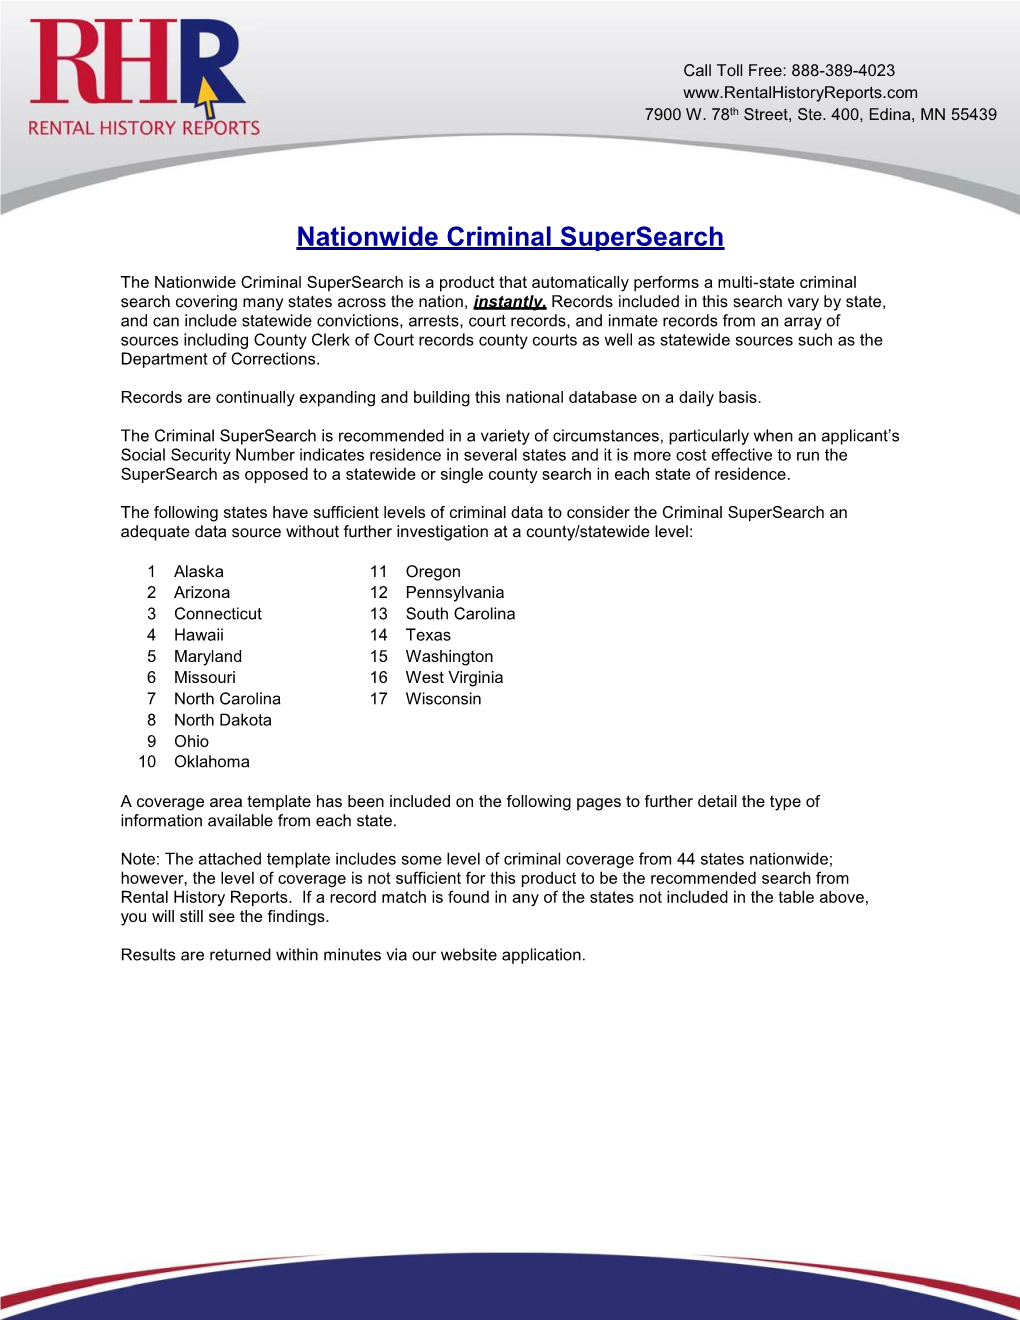 Nationwide Criminal Supersearch